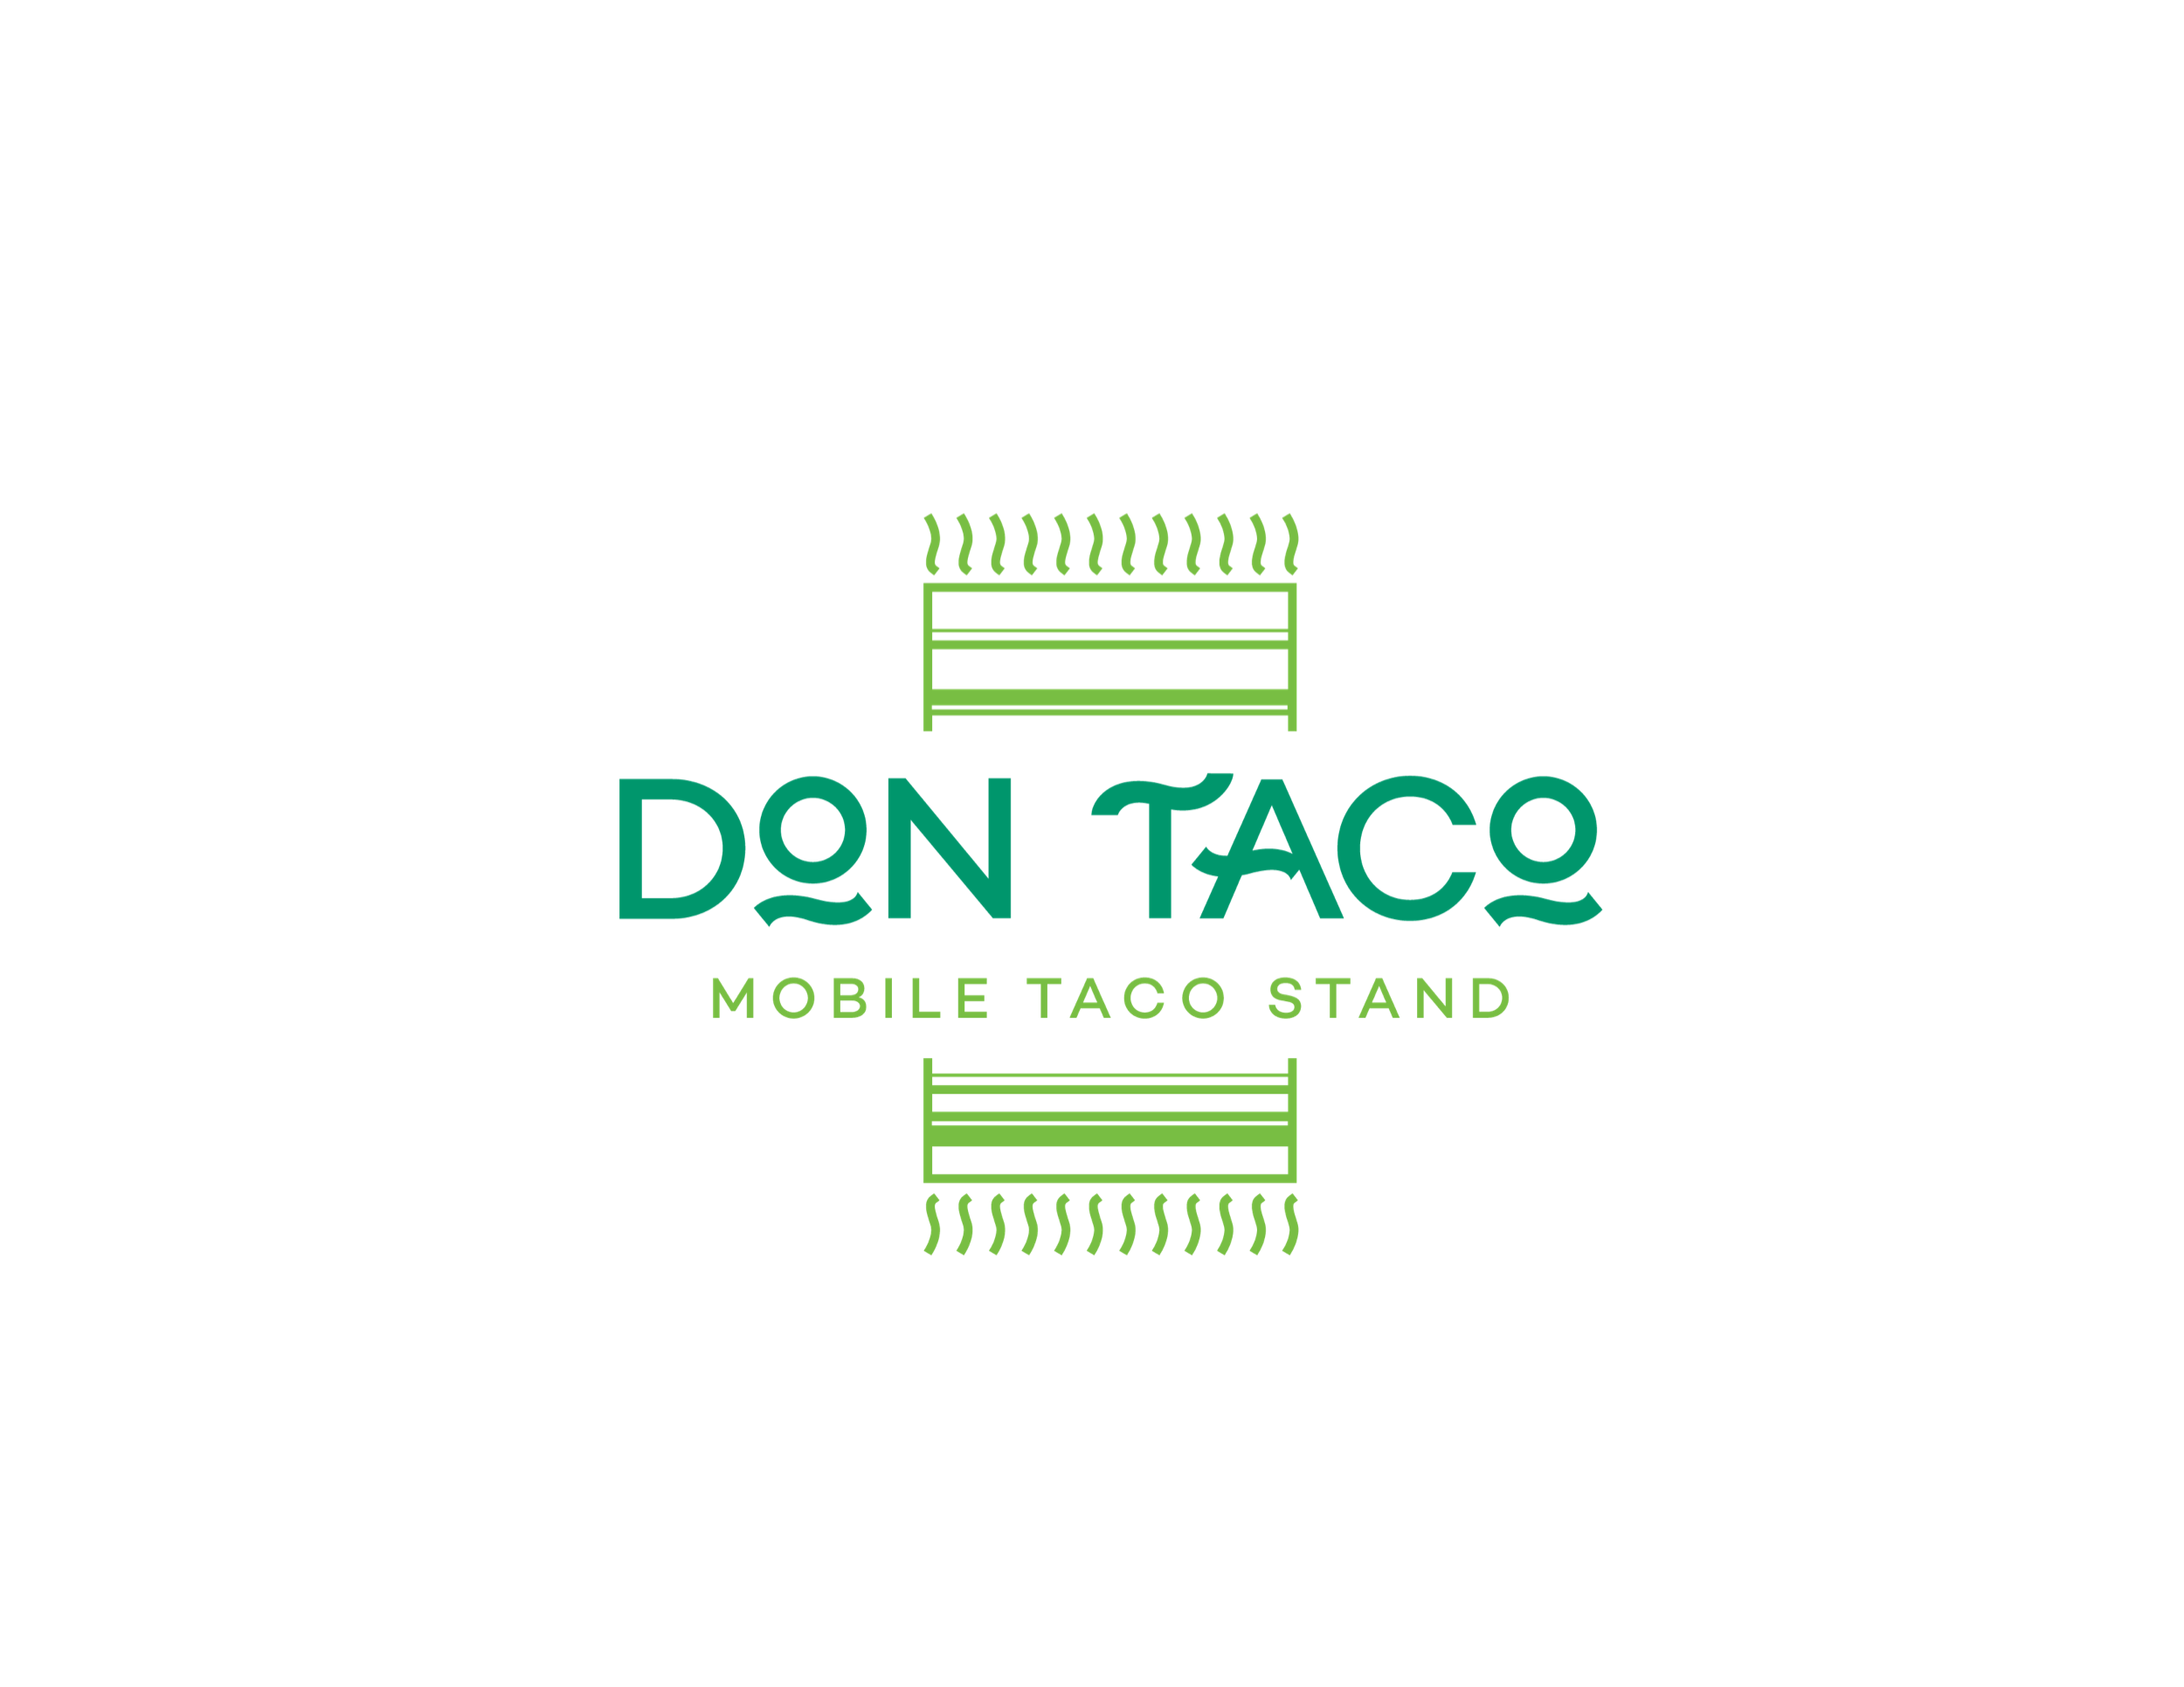 Don Taco Mobile Taco stand